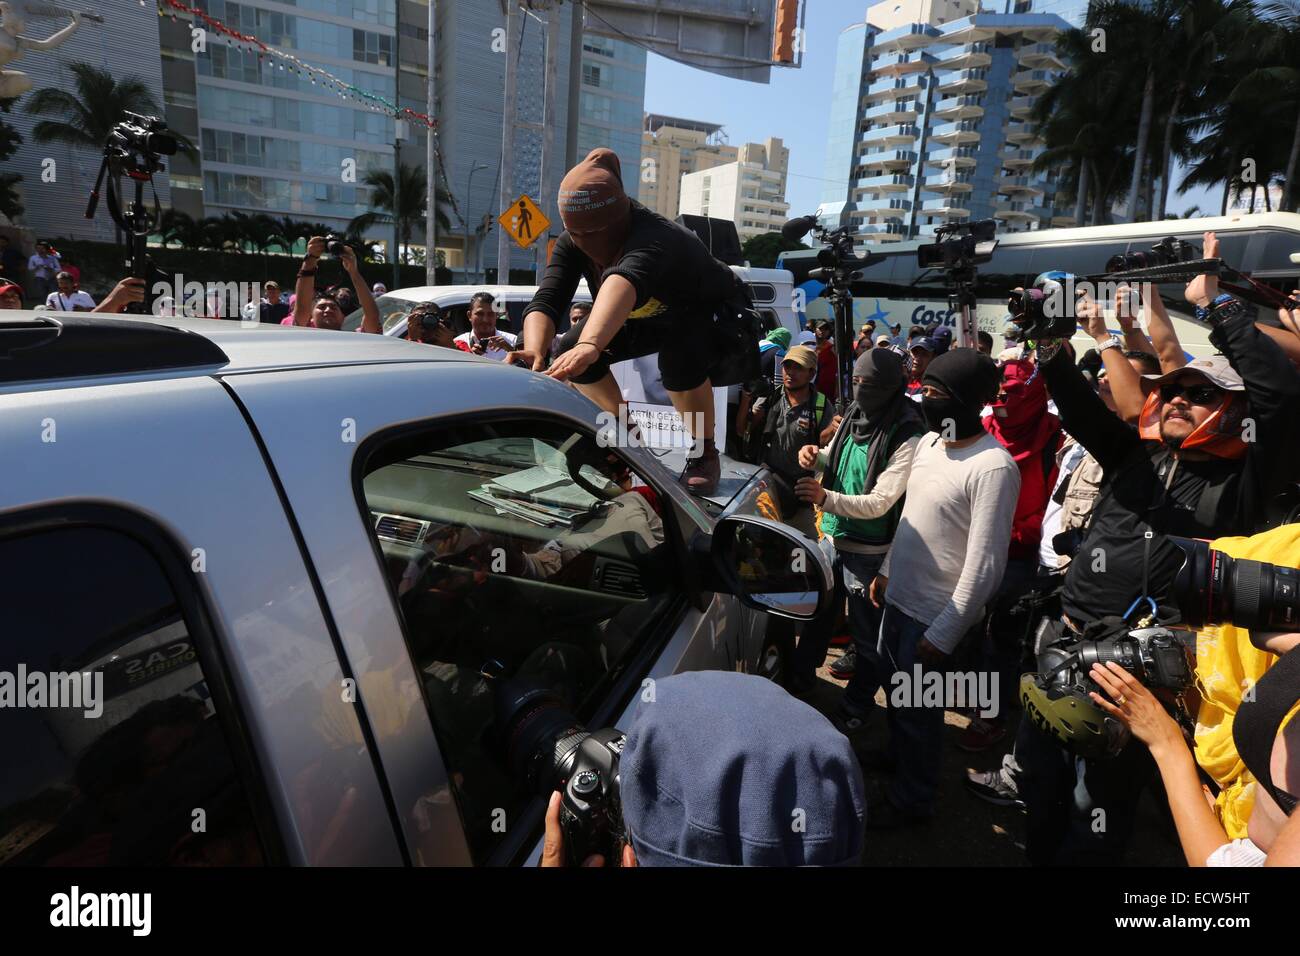 Guerrero, Mexico. 19th Dec, 2014. Protestors surround the vehicle of Acapulco's Mayor Luis Walton Aburto during a protest demanding justice for the 43 missing students from Ayotzinapa Teachers College, in Acapulco, Guerrero State, Mexico, on Dec. 19, 2014. © Javier Verdin/Xinhua/Alamy Live News Stock Photo